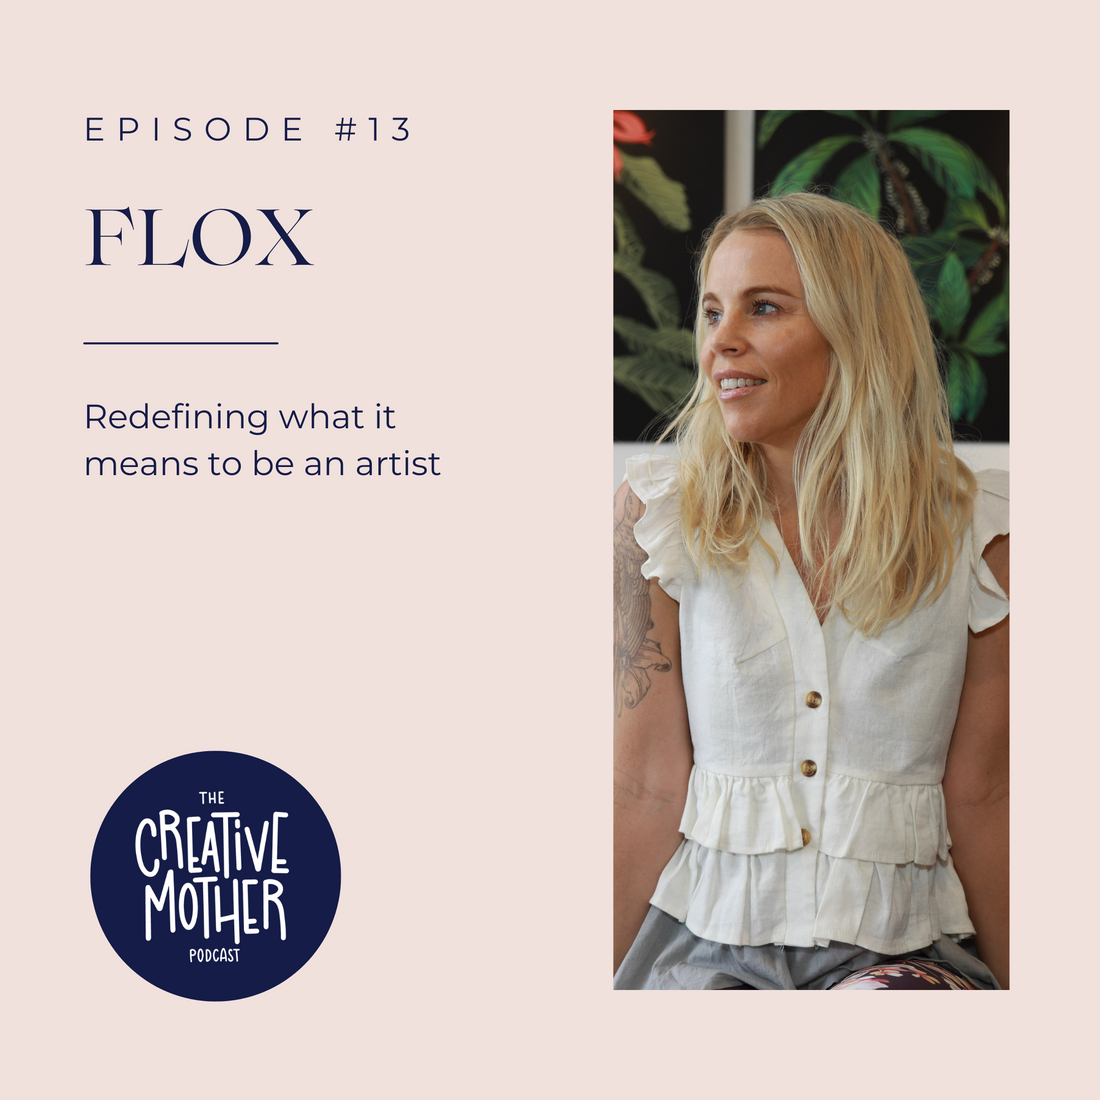 S2 E13: Redefining what it means to be an artist with FLOX | Aerosol and stencil artist